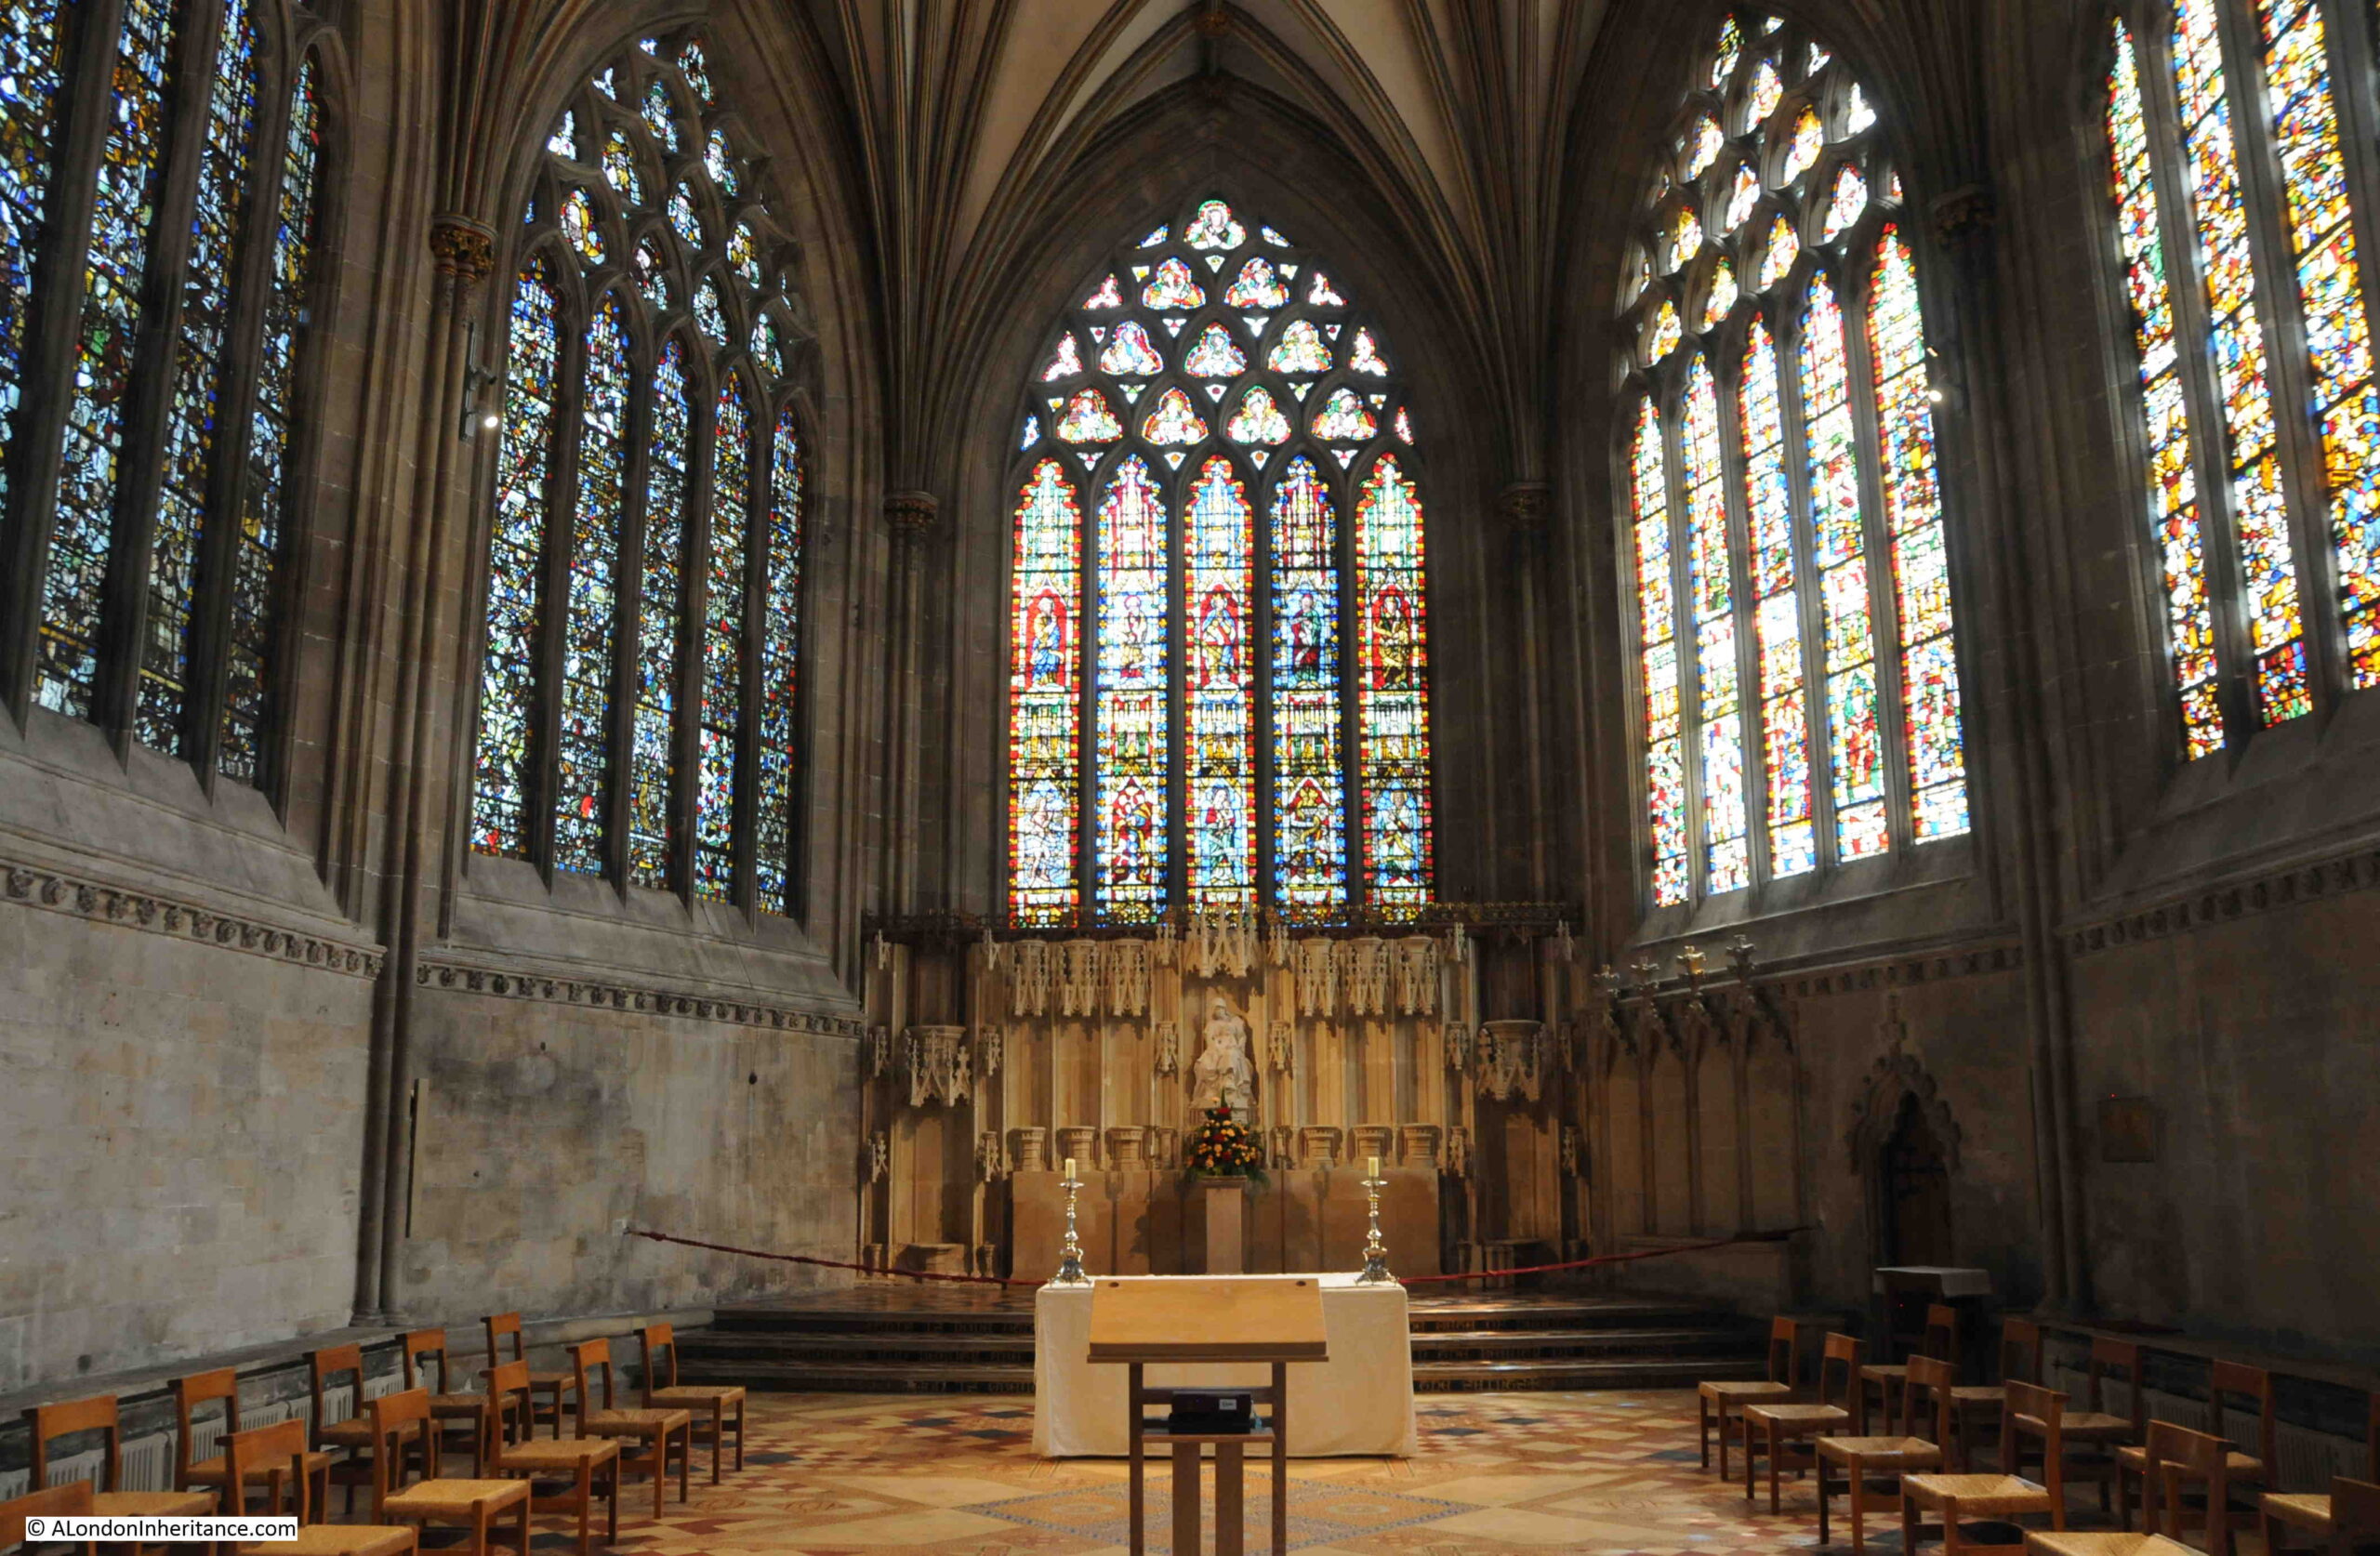 Lady Chapel at Wells Cathedral